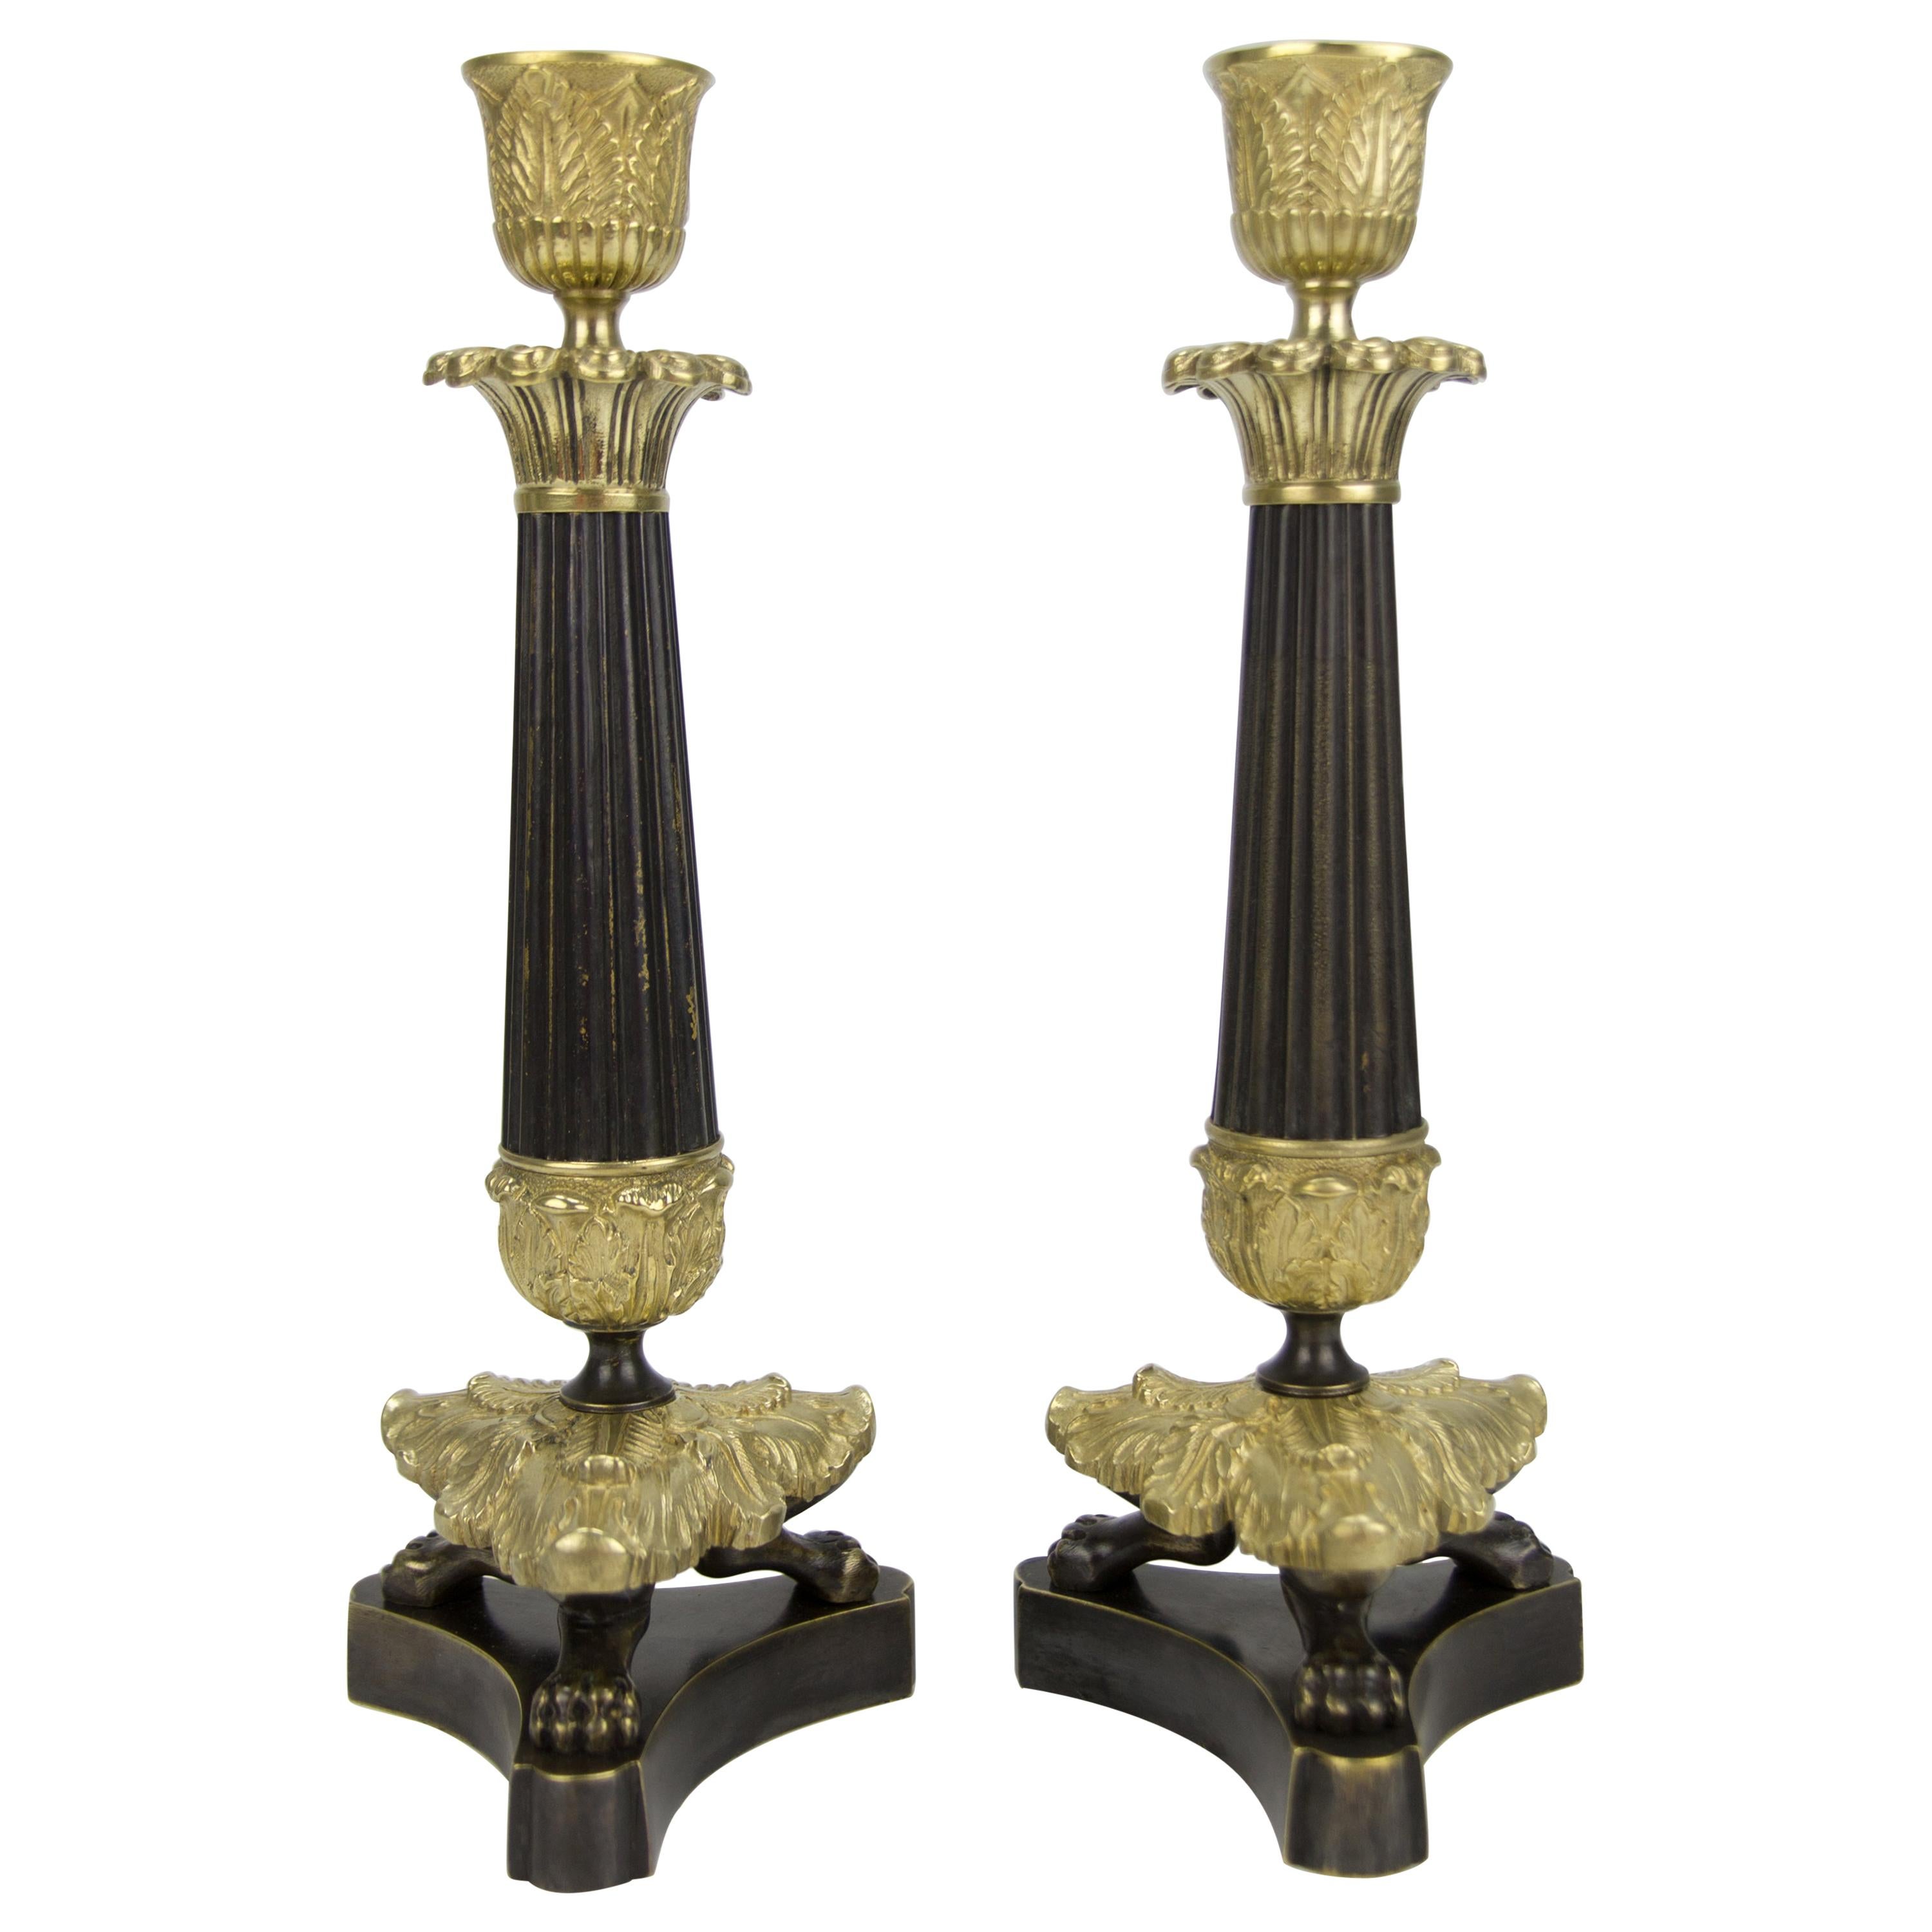 Pair of French Empire Style Bronze and Brass Candlesticks on Tripod Base